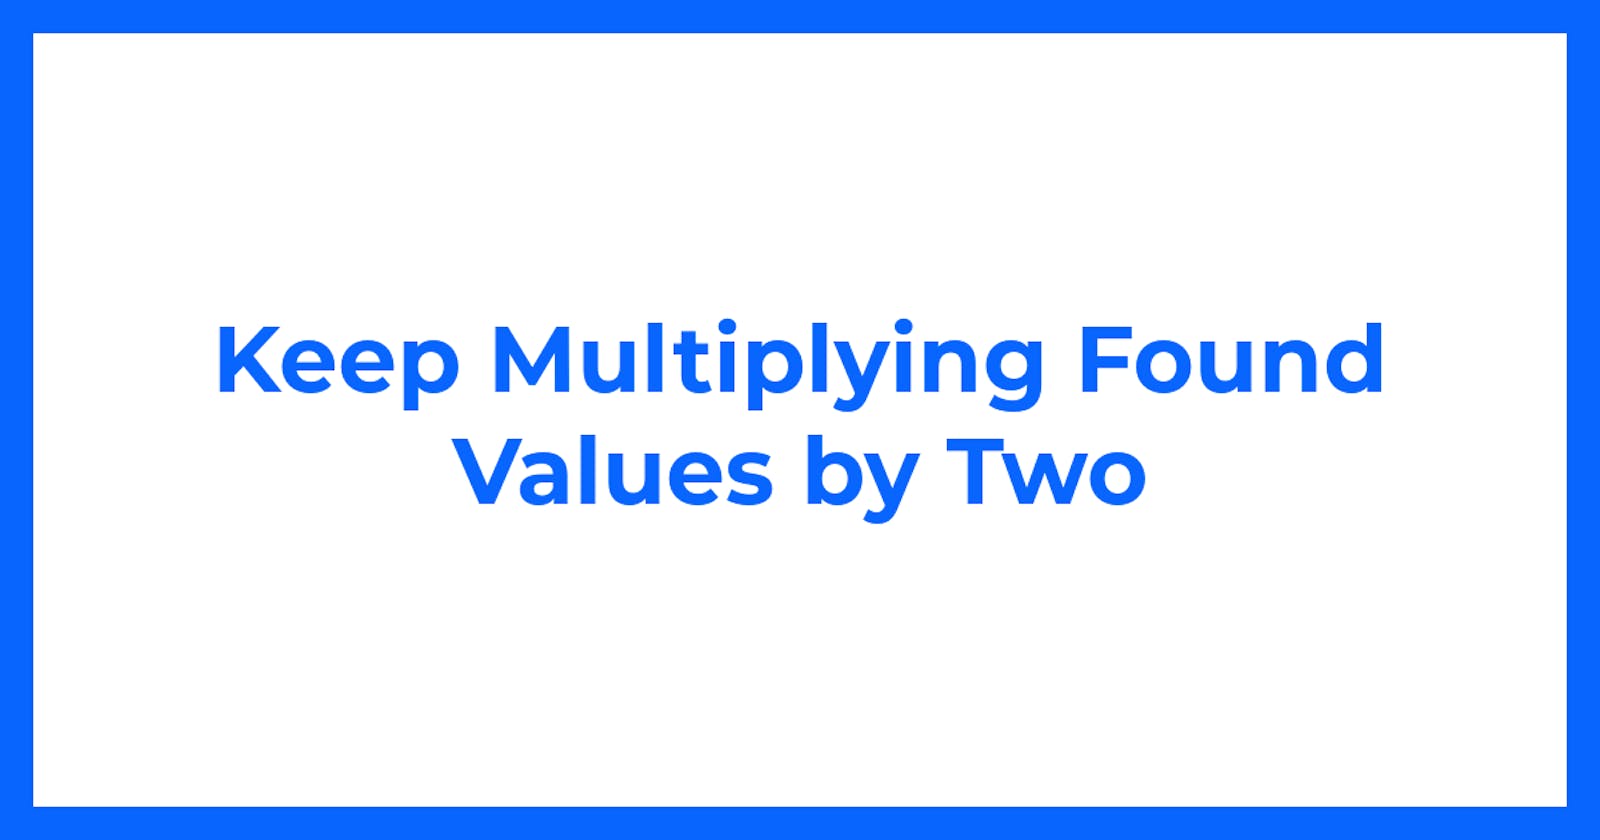 Keep Multiplying Found Values by Two